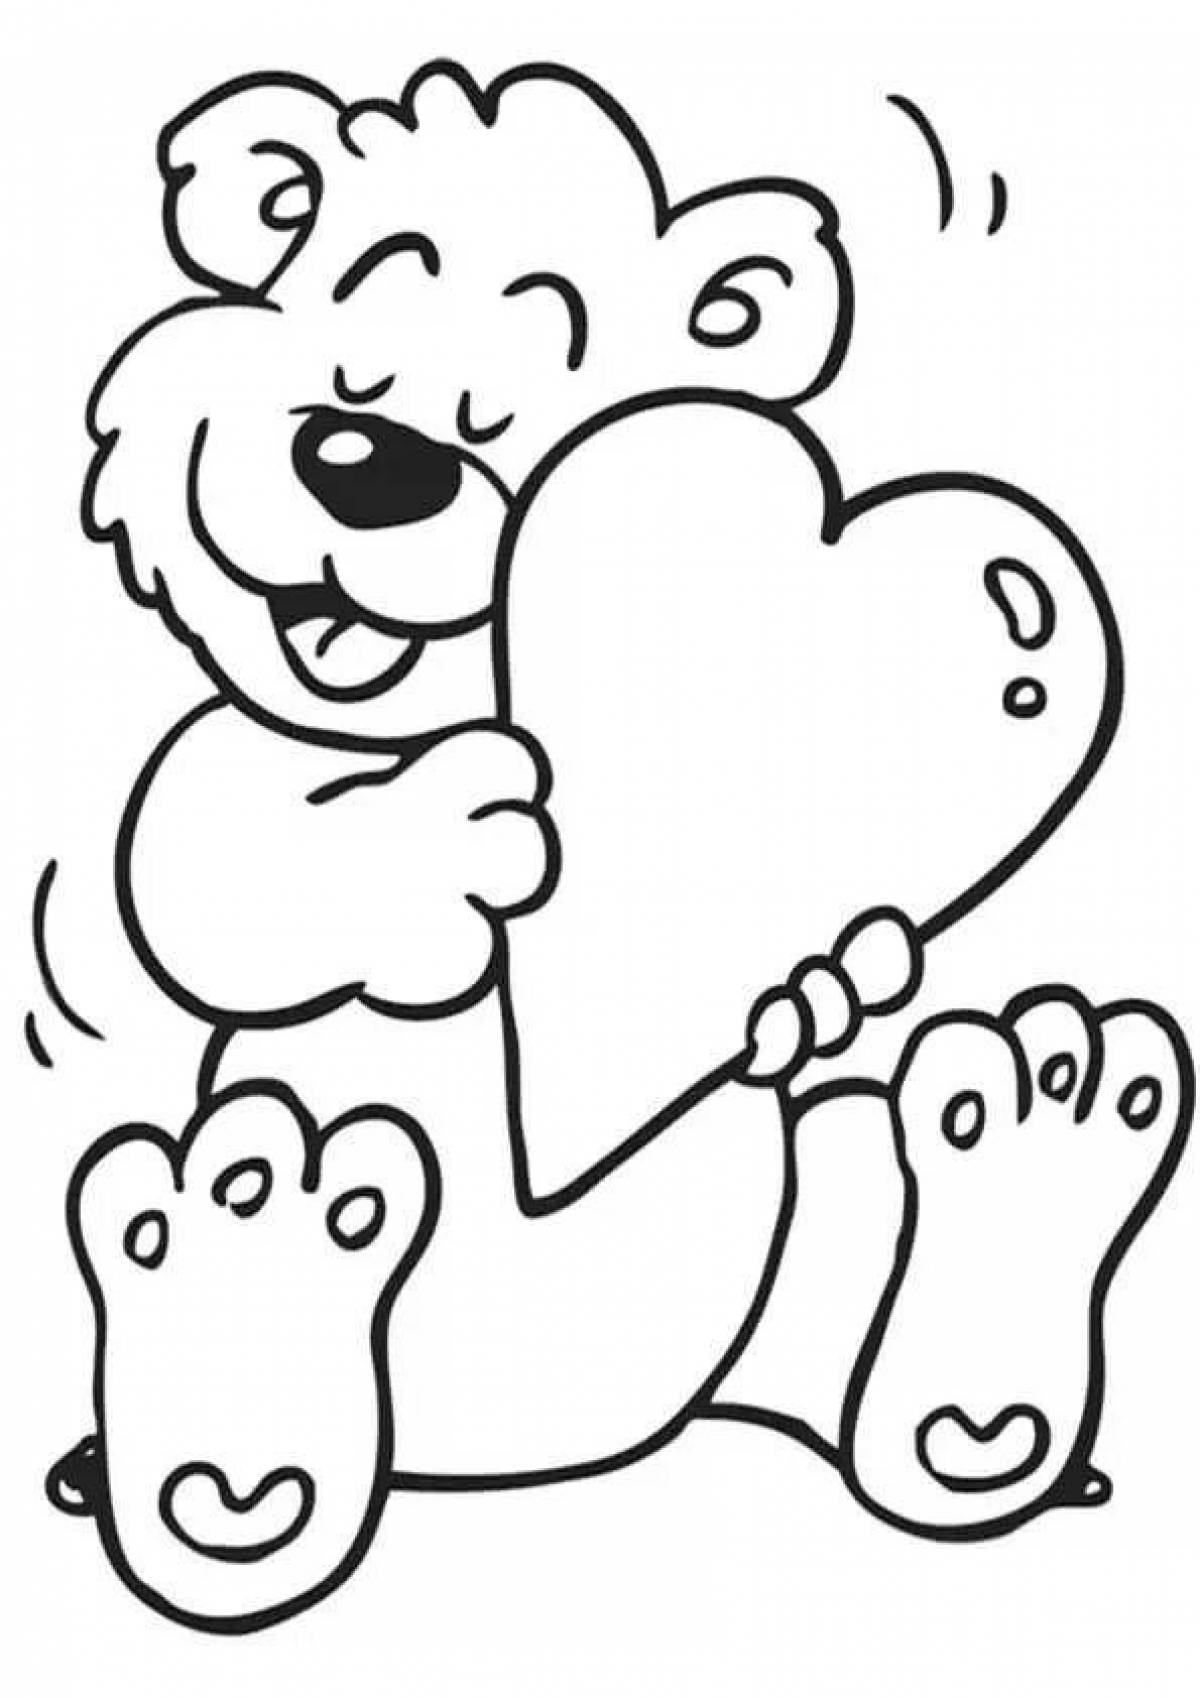 Coloring bright bear with a heart